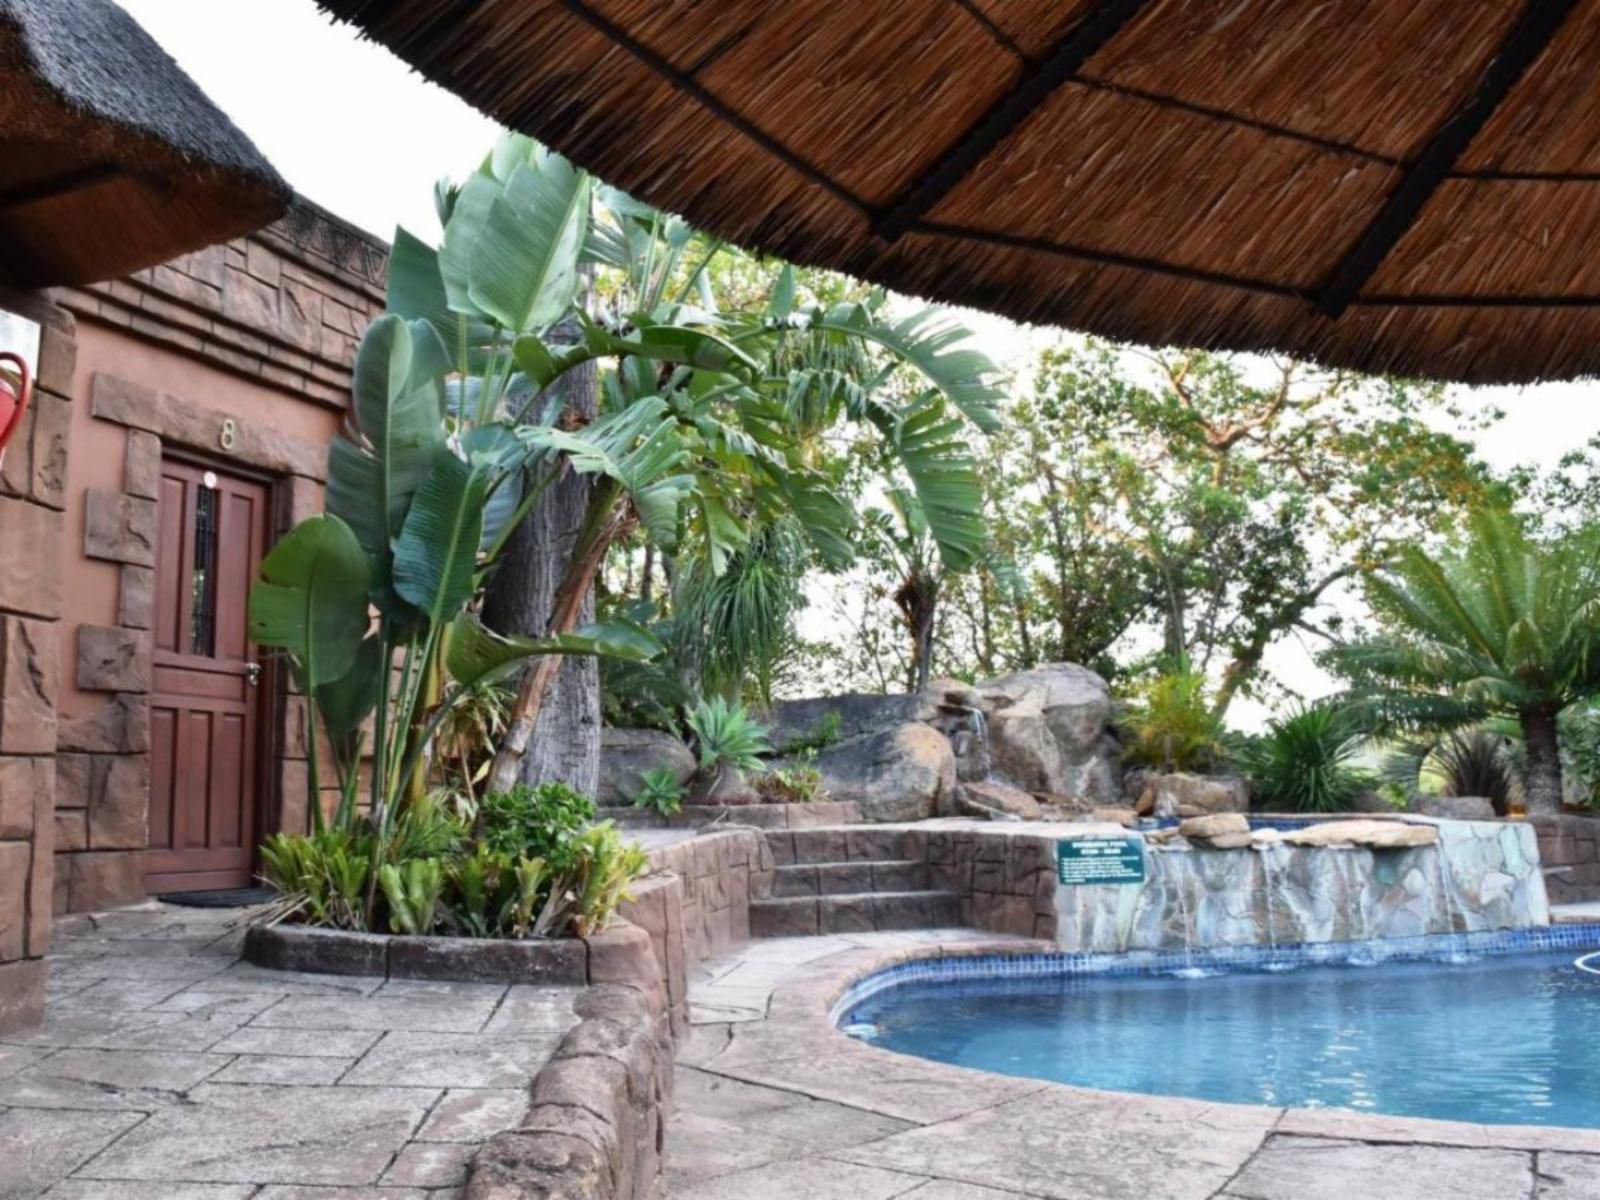 Tipperary Game Lodge Nelspruit Mpumalanga South Africa Palm Tree, Plant, Nature, Wood, Garden, Swimming Pool